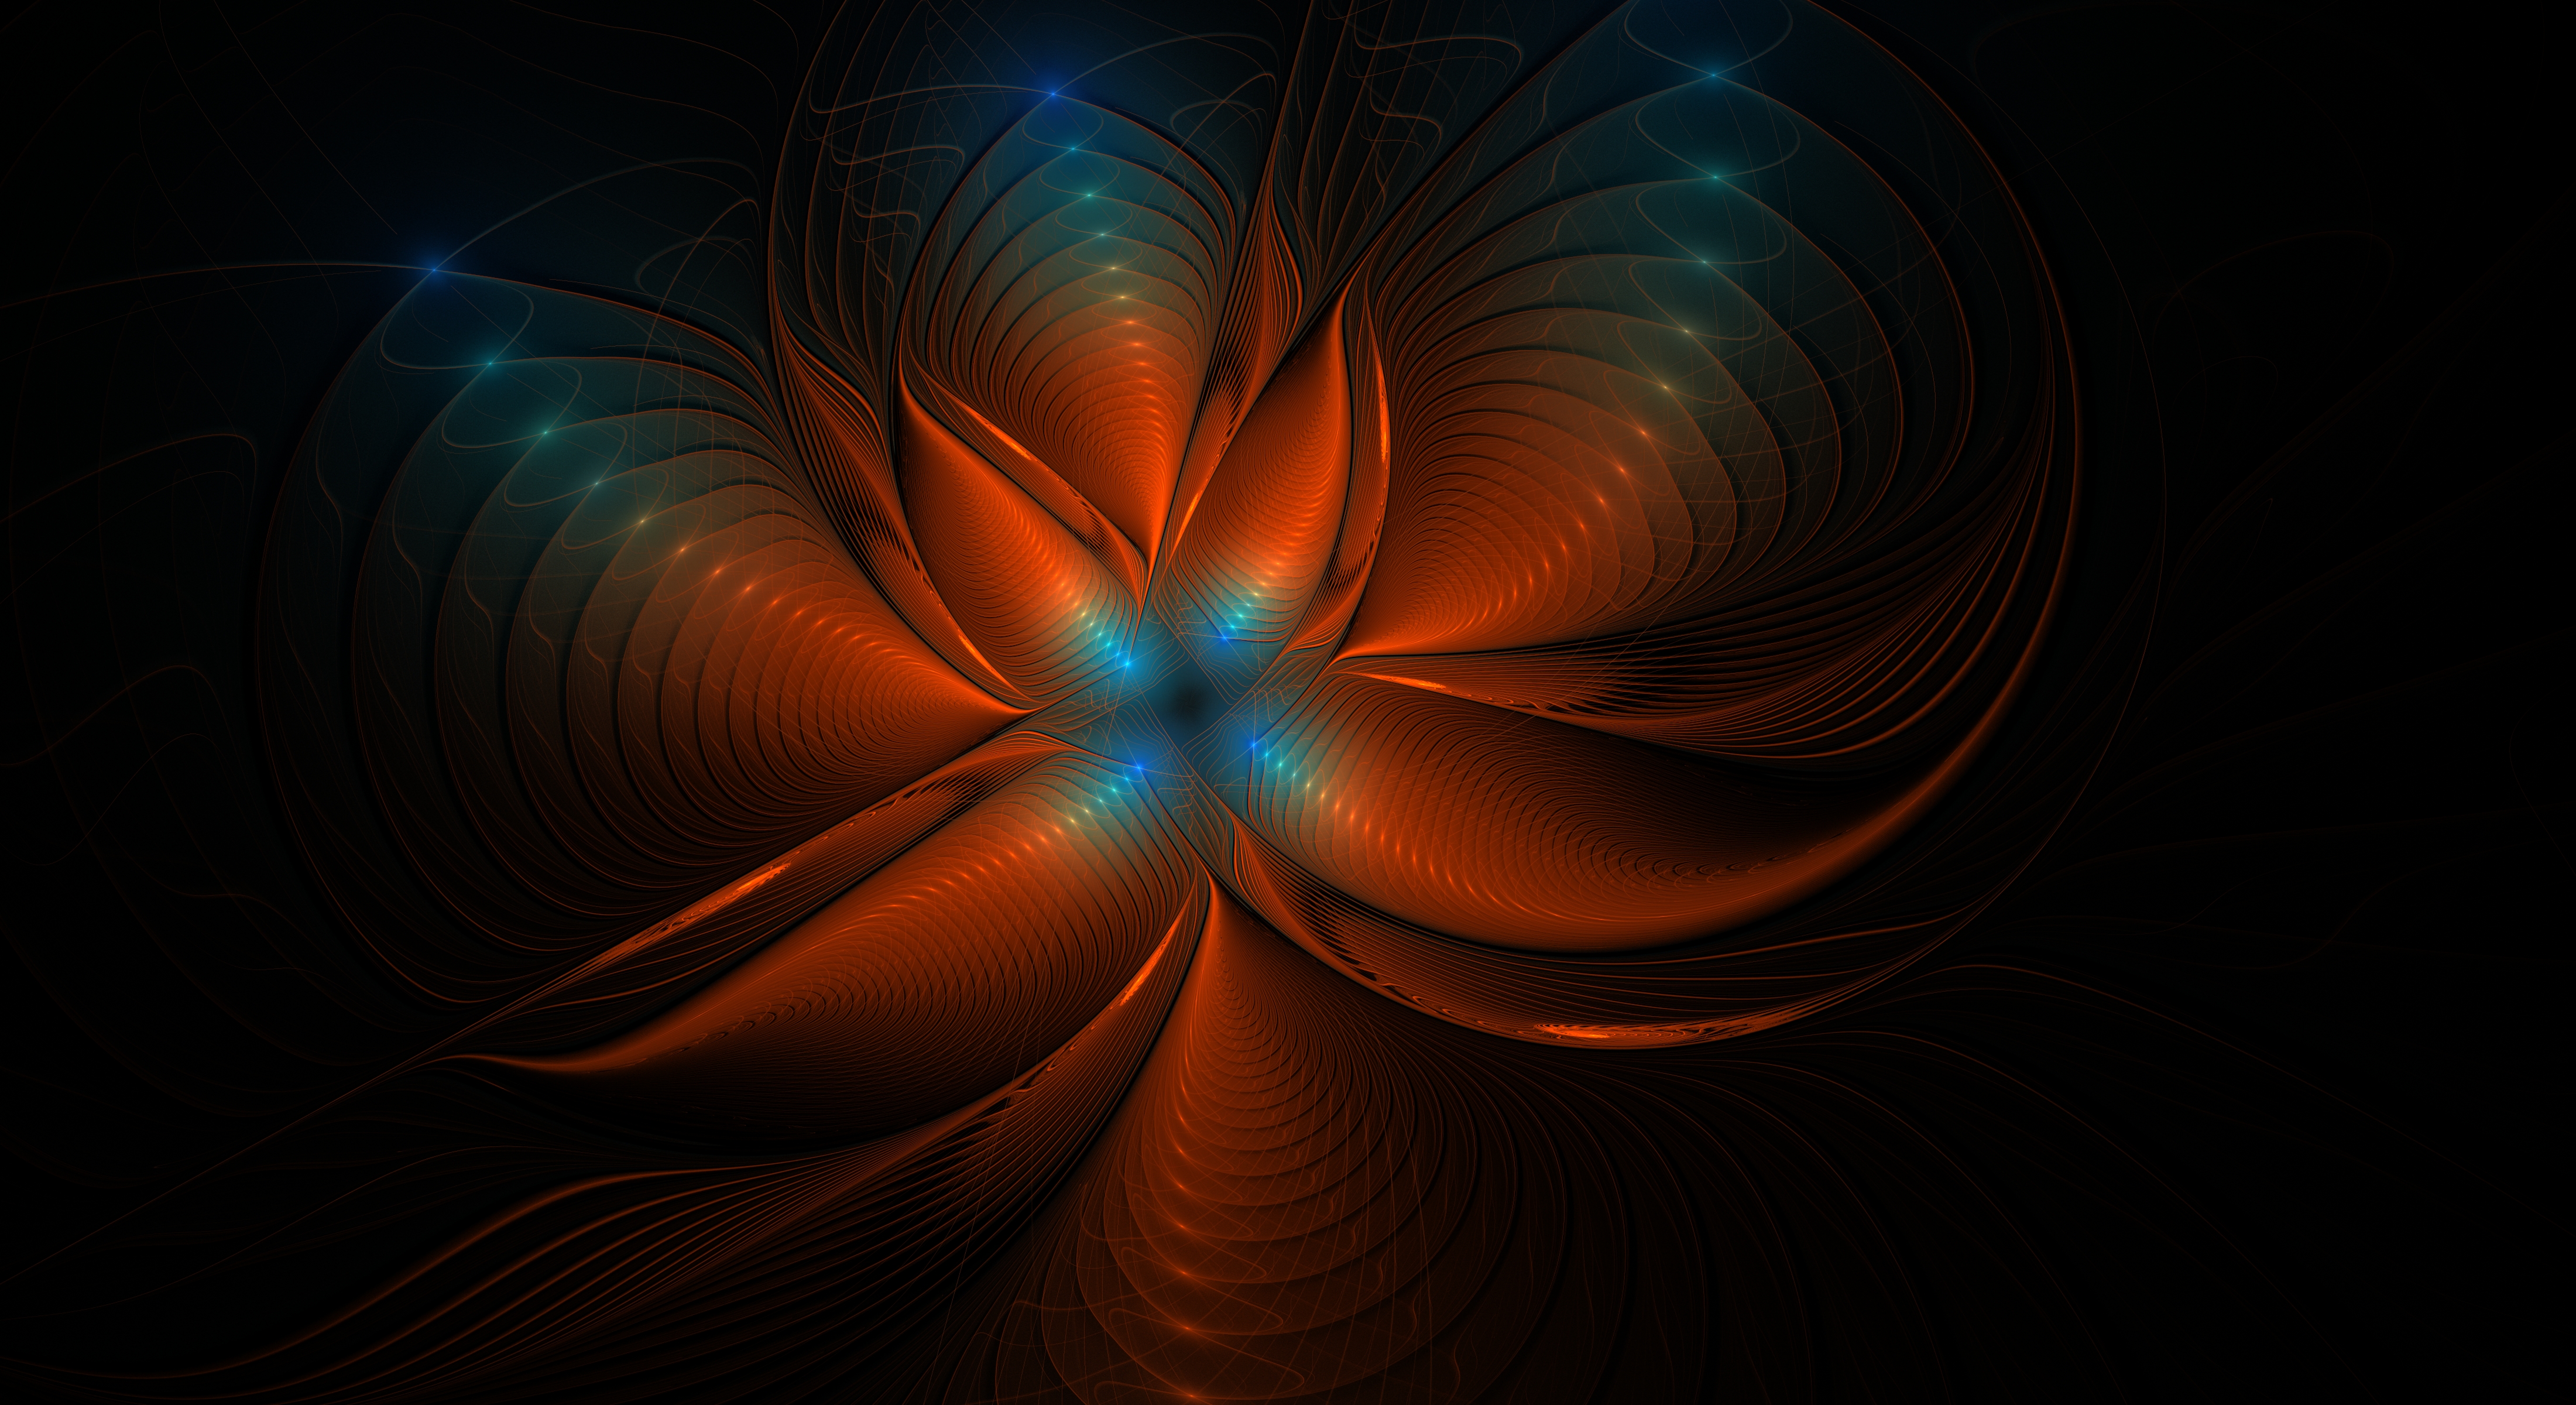 glow, fractal, confused, abstract, blue, brown, intricate images